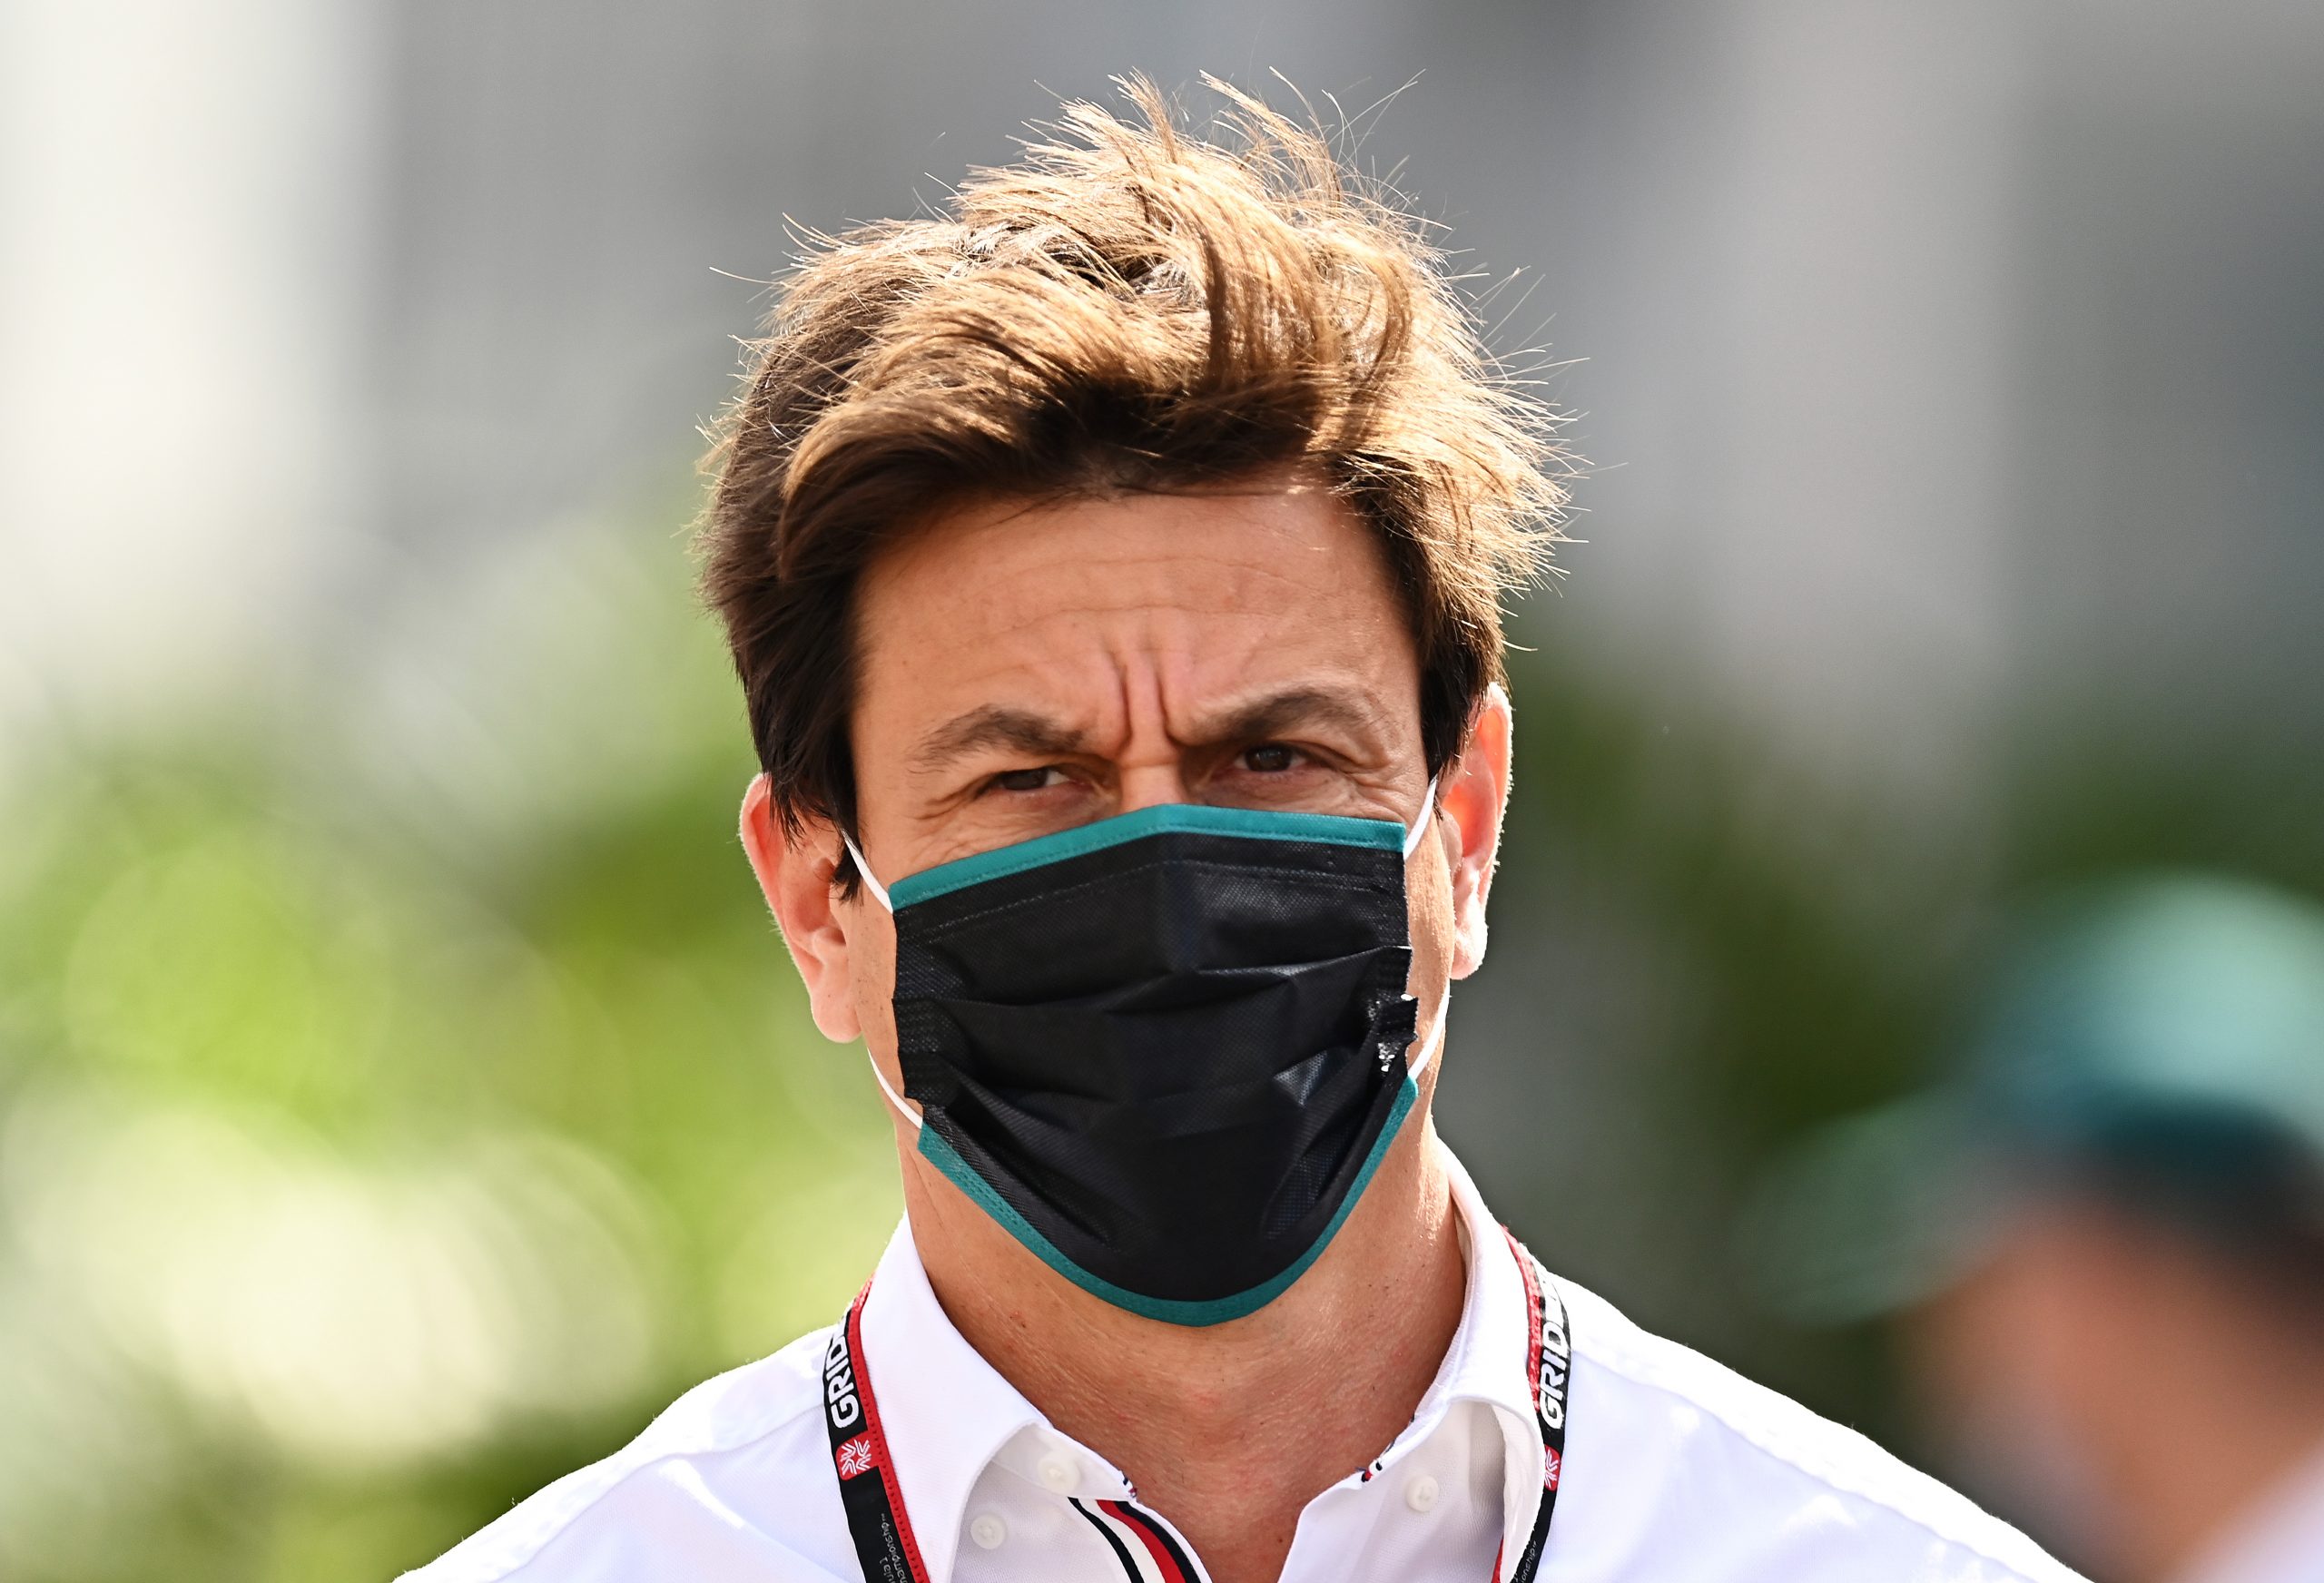 Toto Wolff Declares, “Diplomacy Has Ended,” in Fight With FIA Over Sao Paulo Grand Prix Events